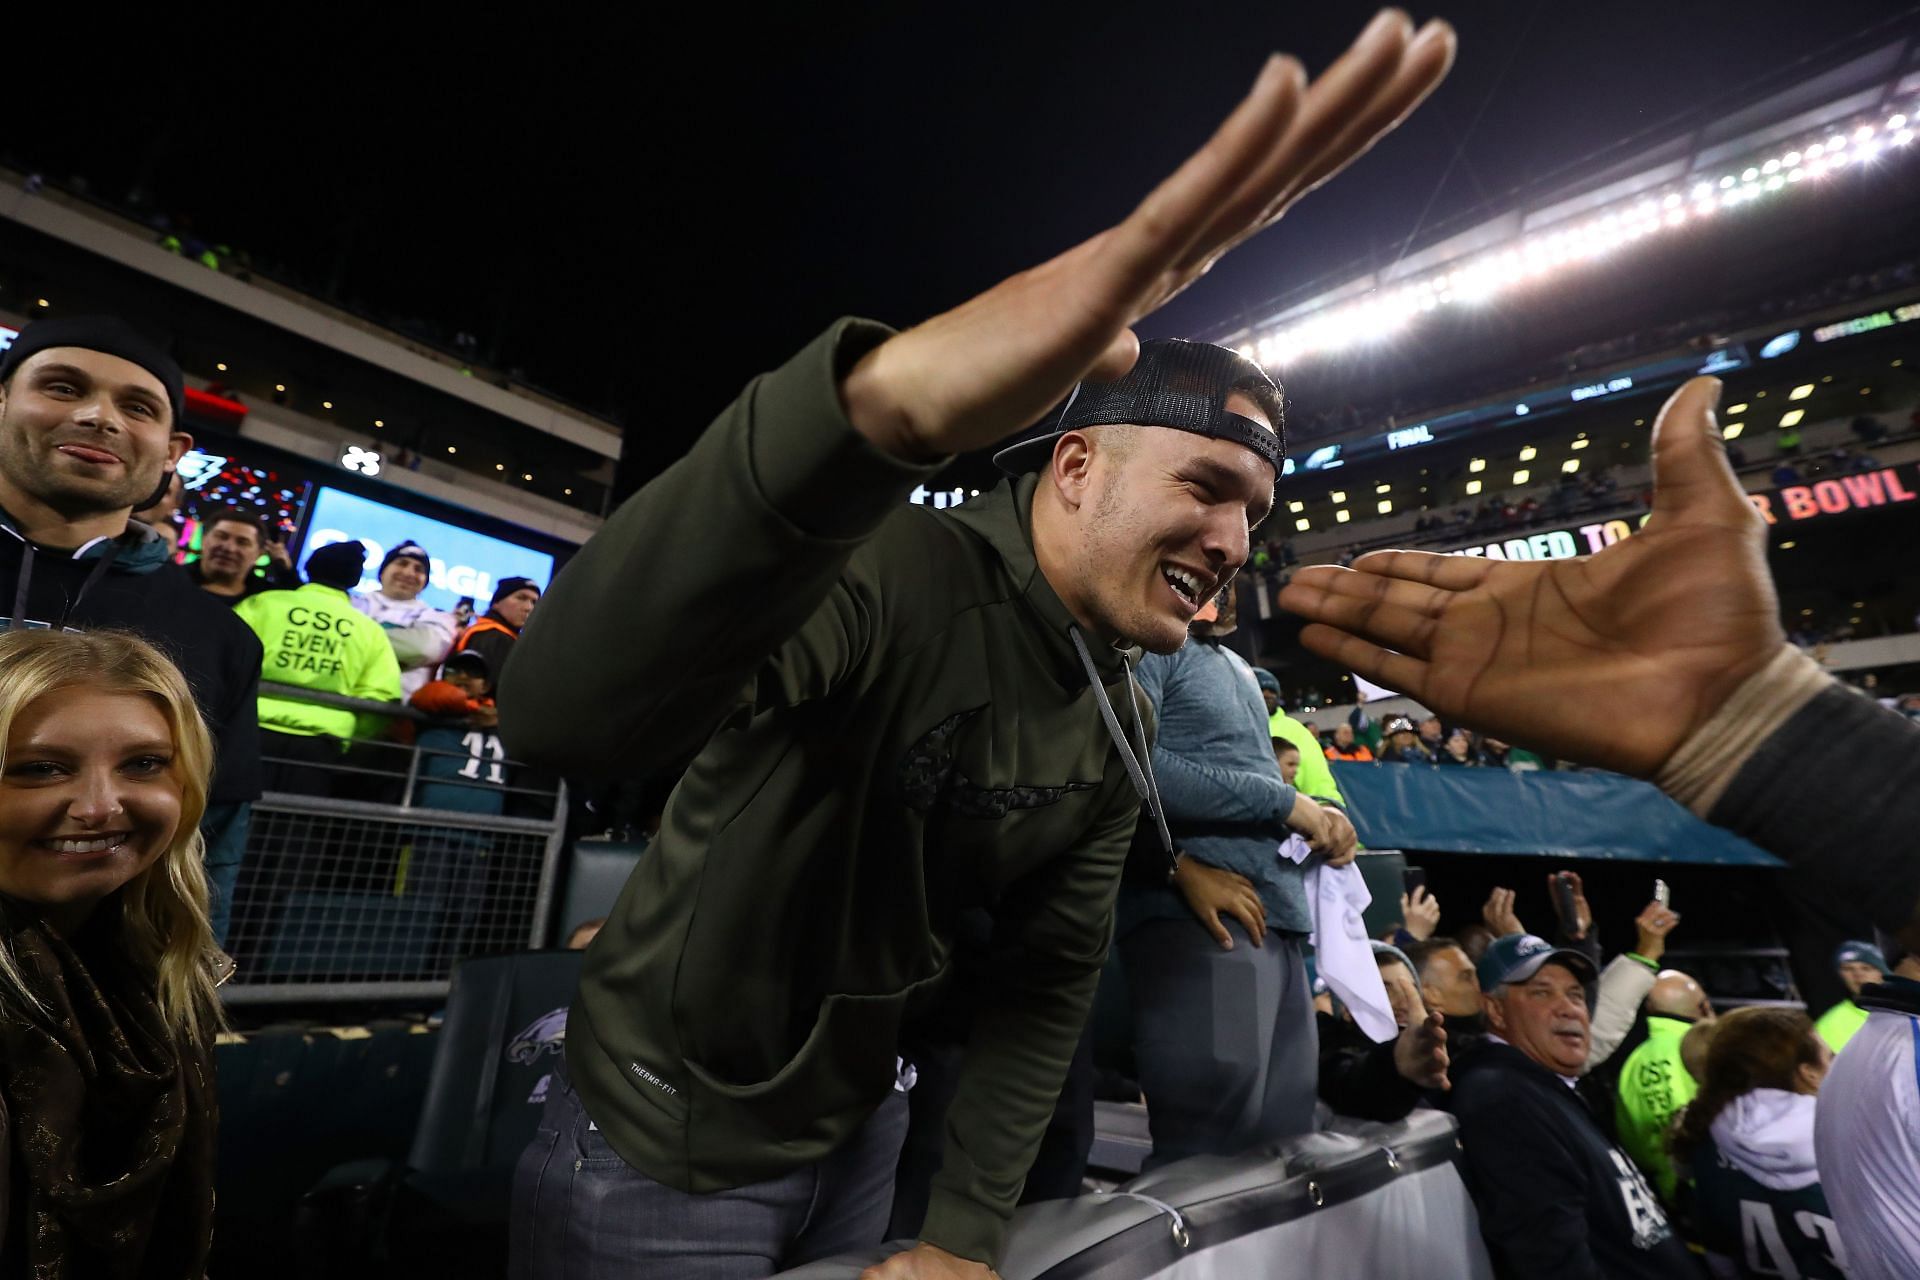 Mike Trout cheers on the Eagles 